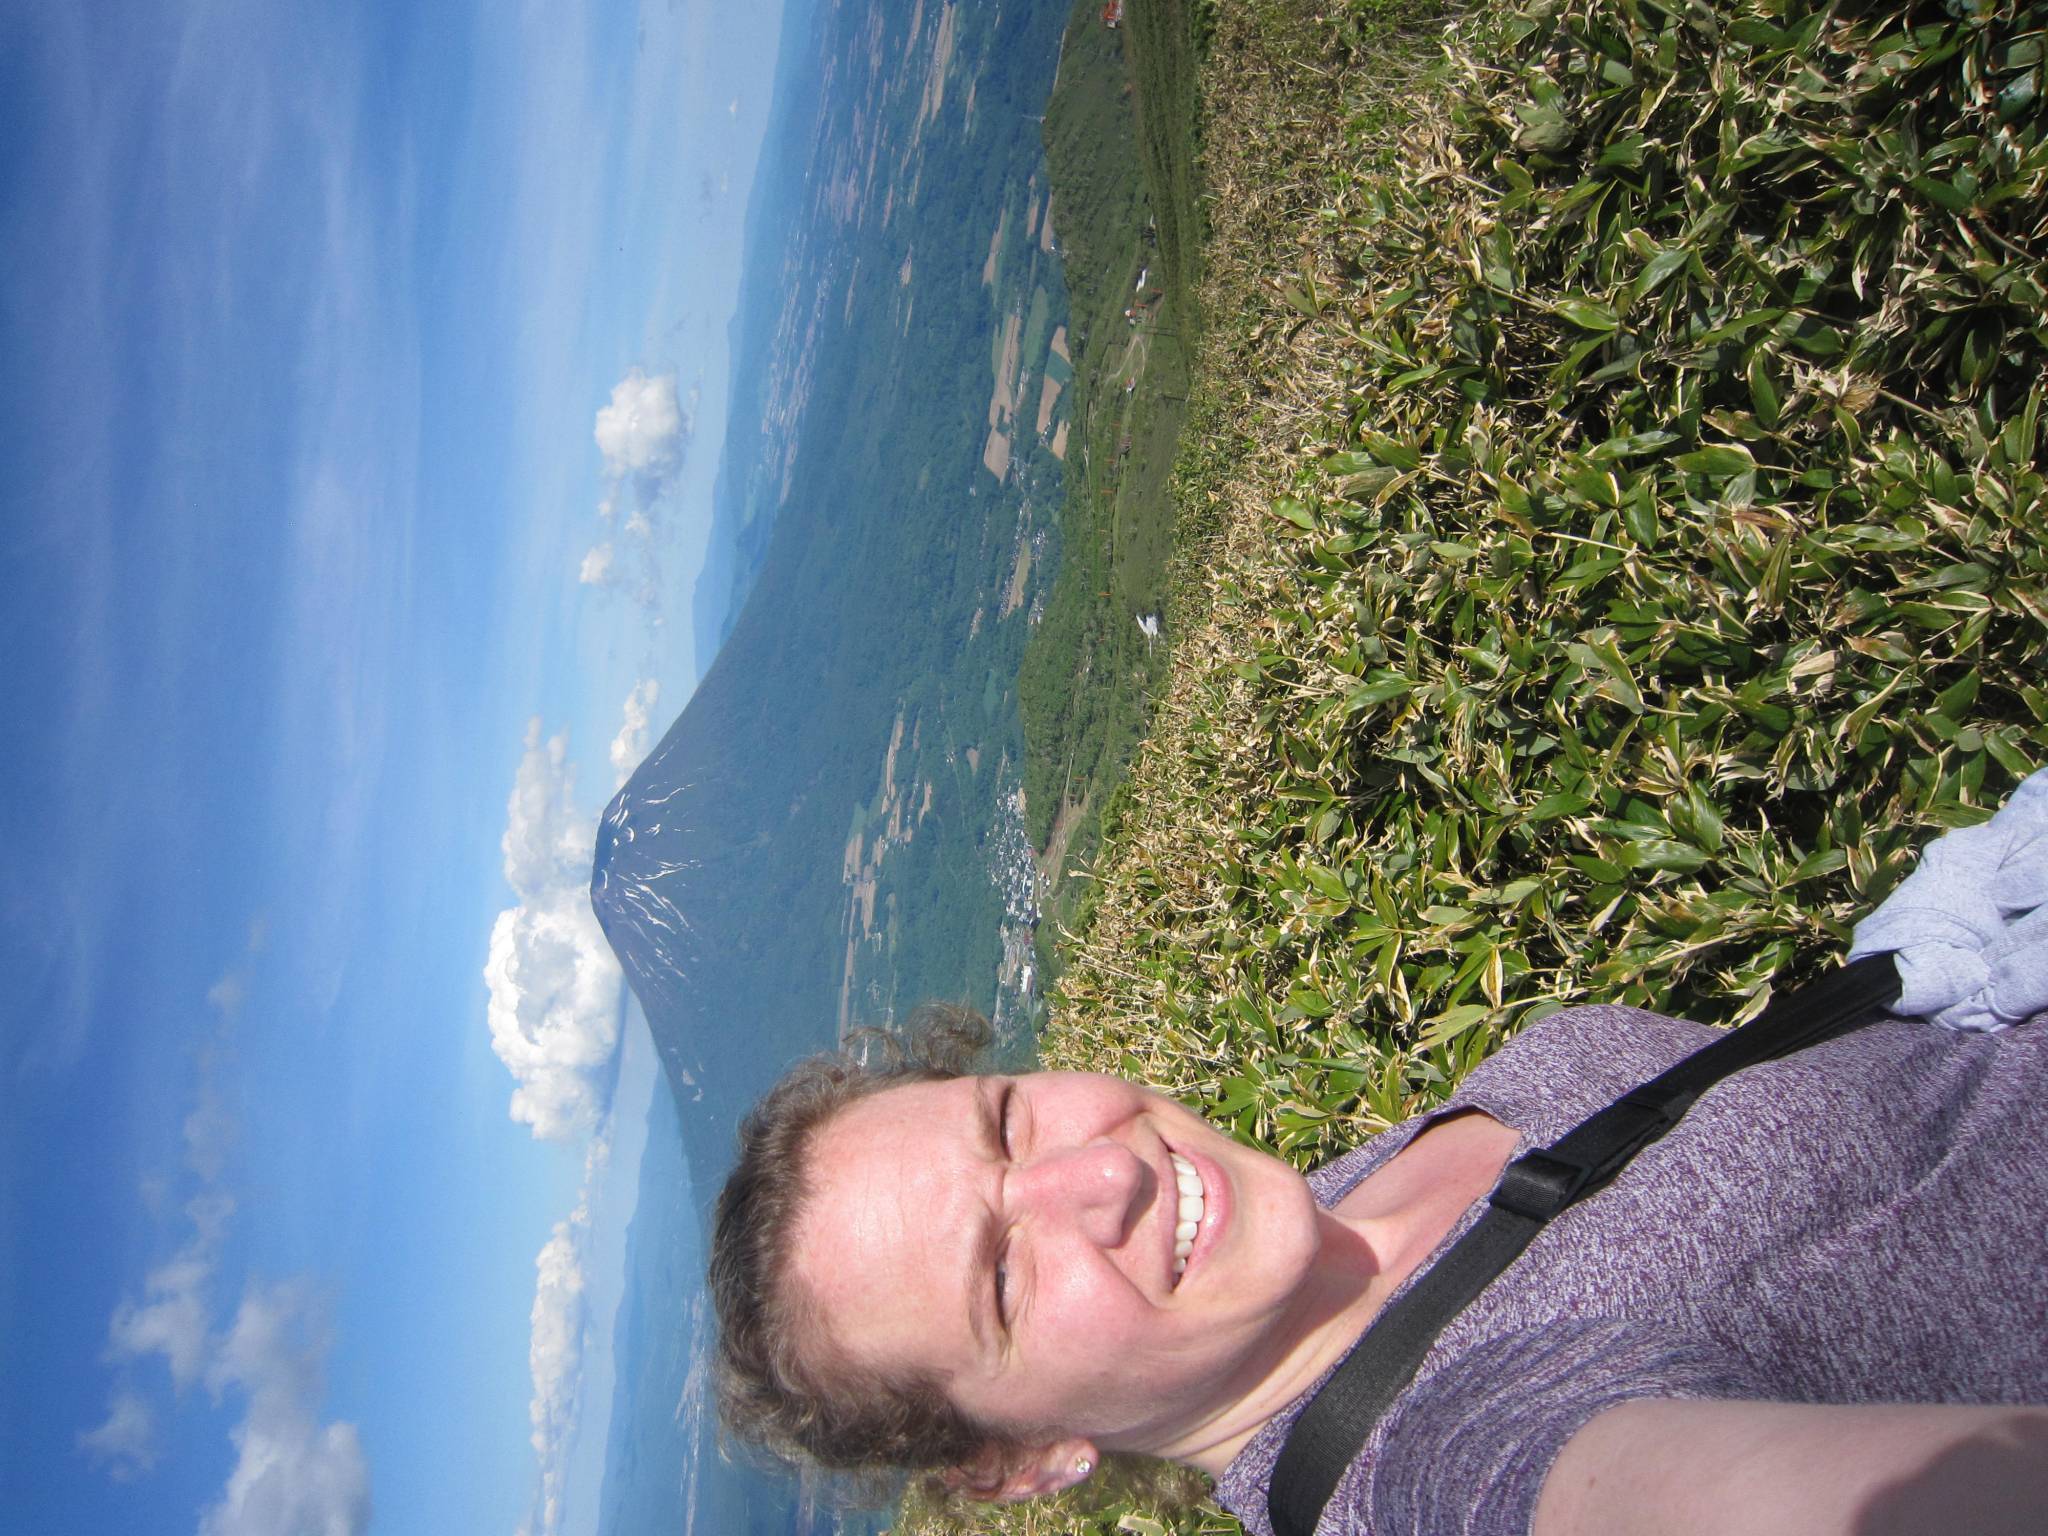 On top of Mt. Annupuri in Hokkaido, Japan looking at Mount Yotei, which is known for its resemblance to Mt. Fuji; June 2019